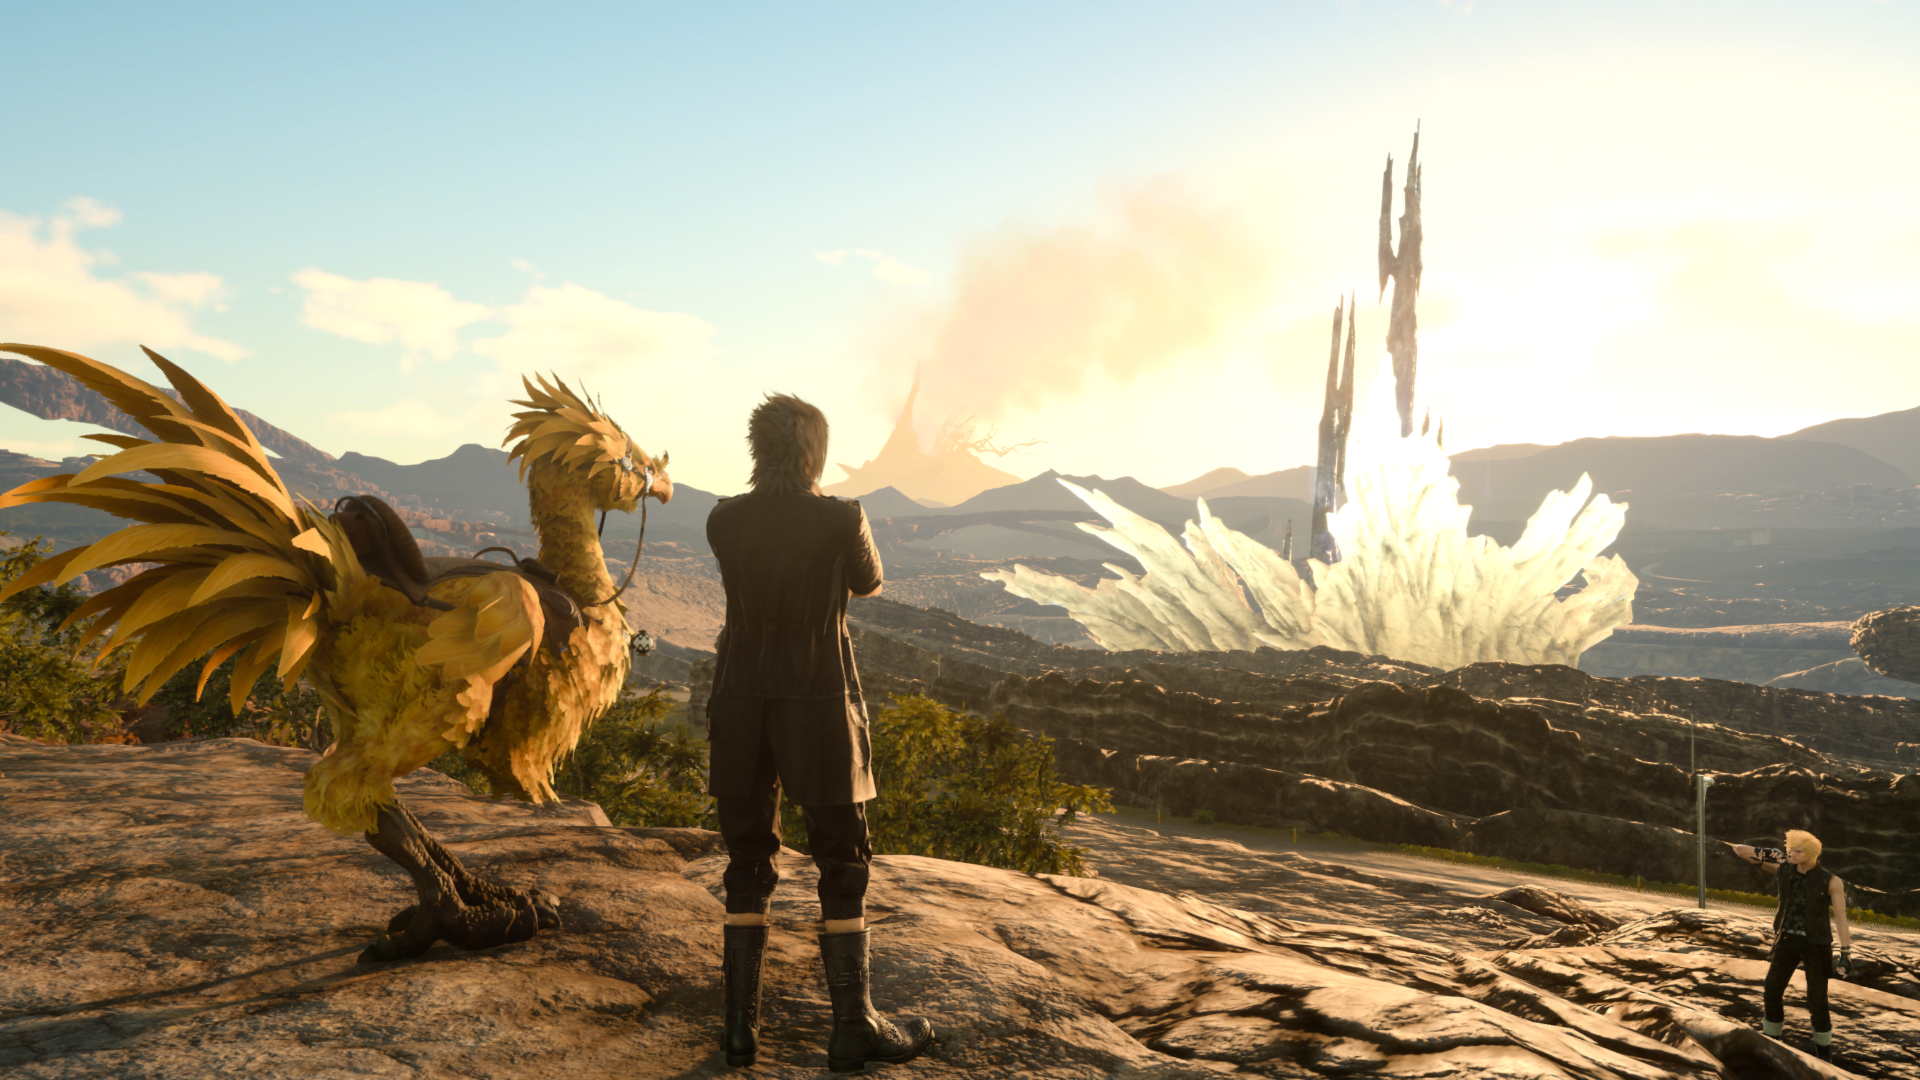 final_fantasy_xv_2_by_gamephotography-daufhnw.png